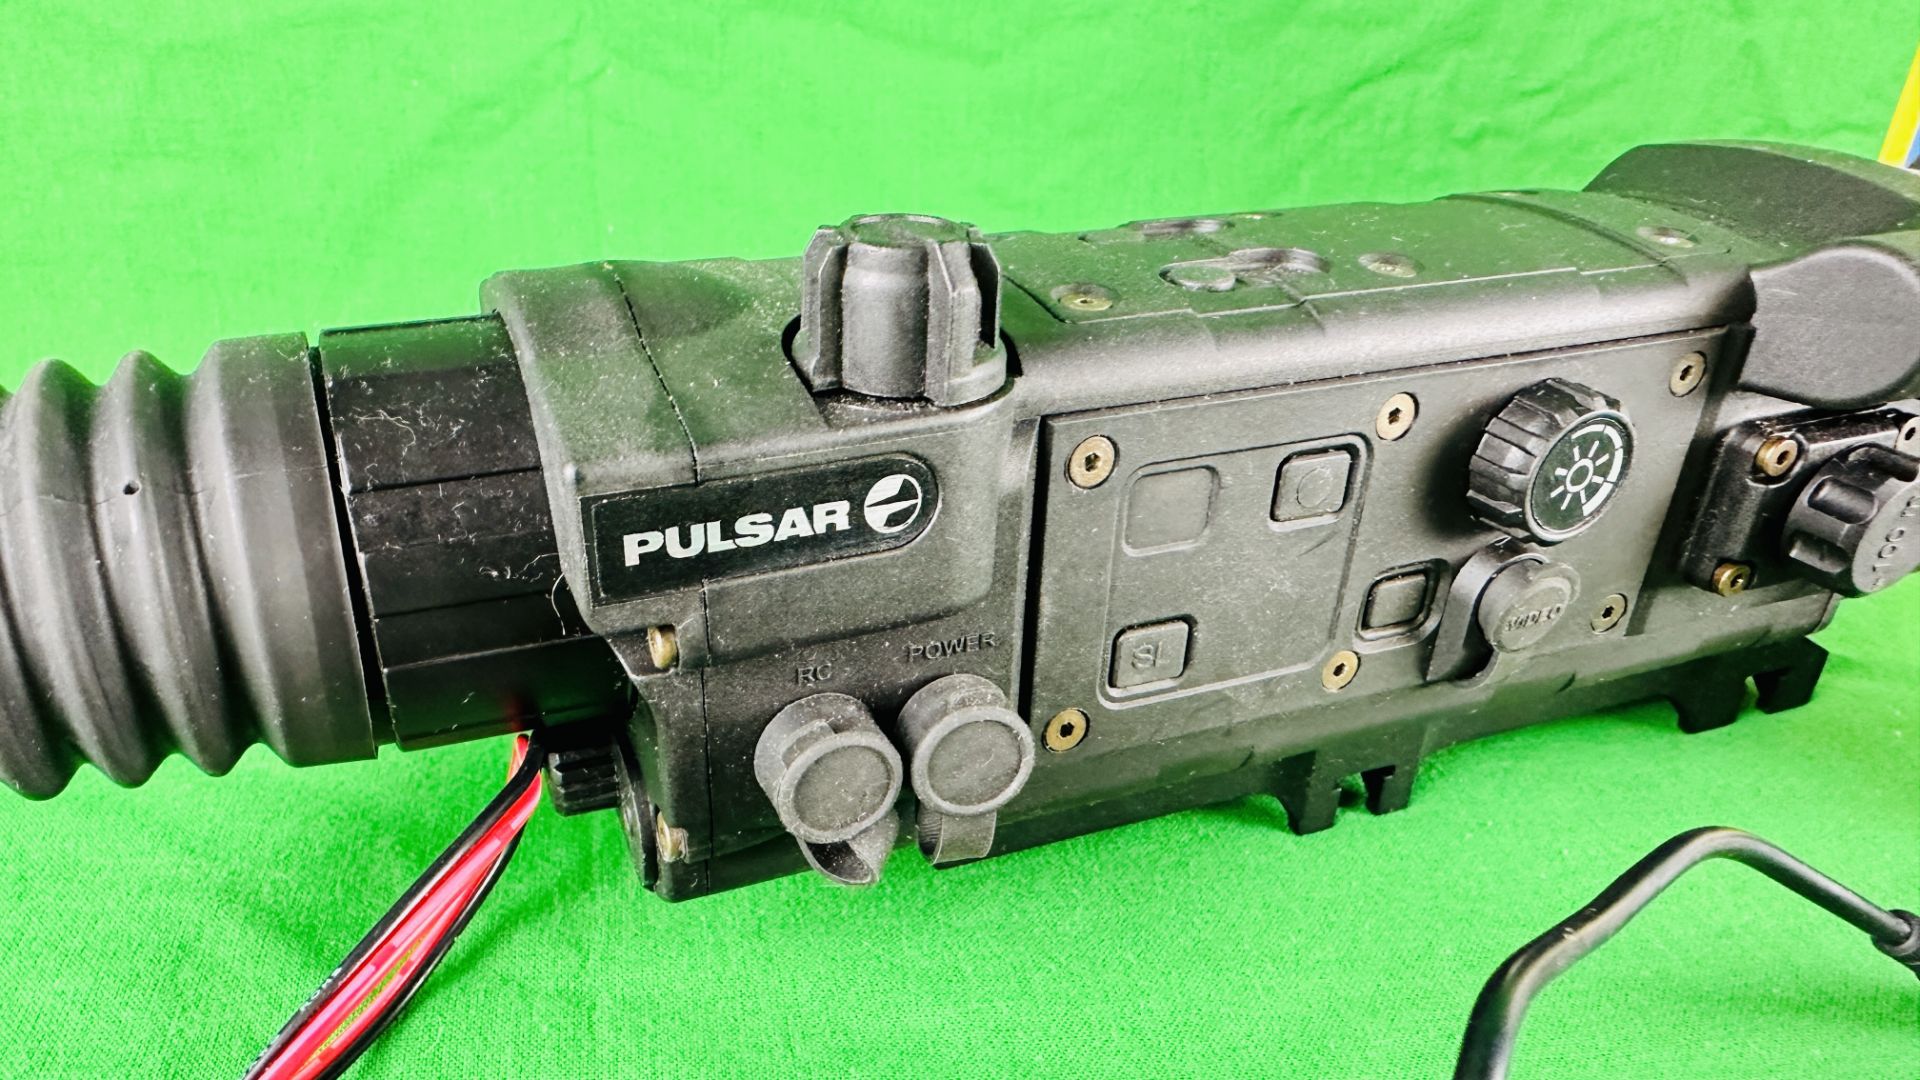 PULSAR DIGISIGHT RIFLE SCOPE, N550, BATTERY, CHARGER, PULSAR IR FLASHLIGHT L-808 - UNTESTED, - Image 4 of 10